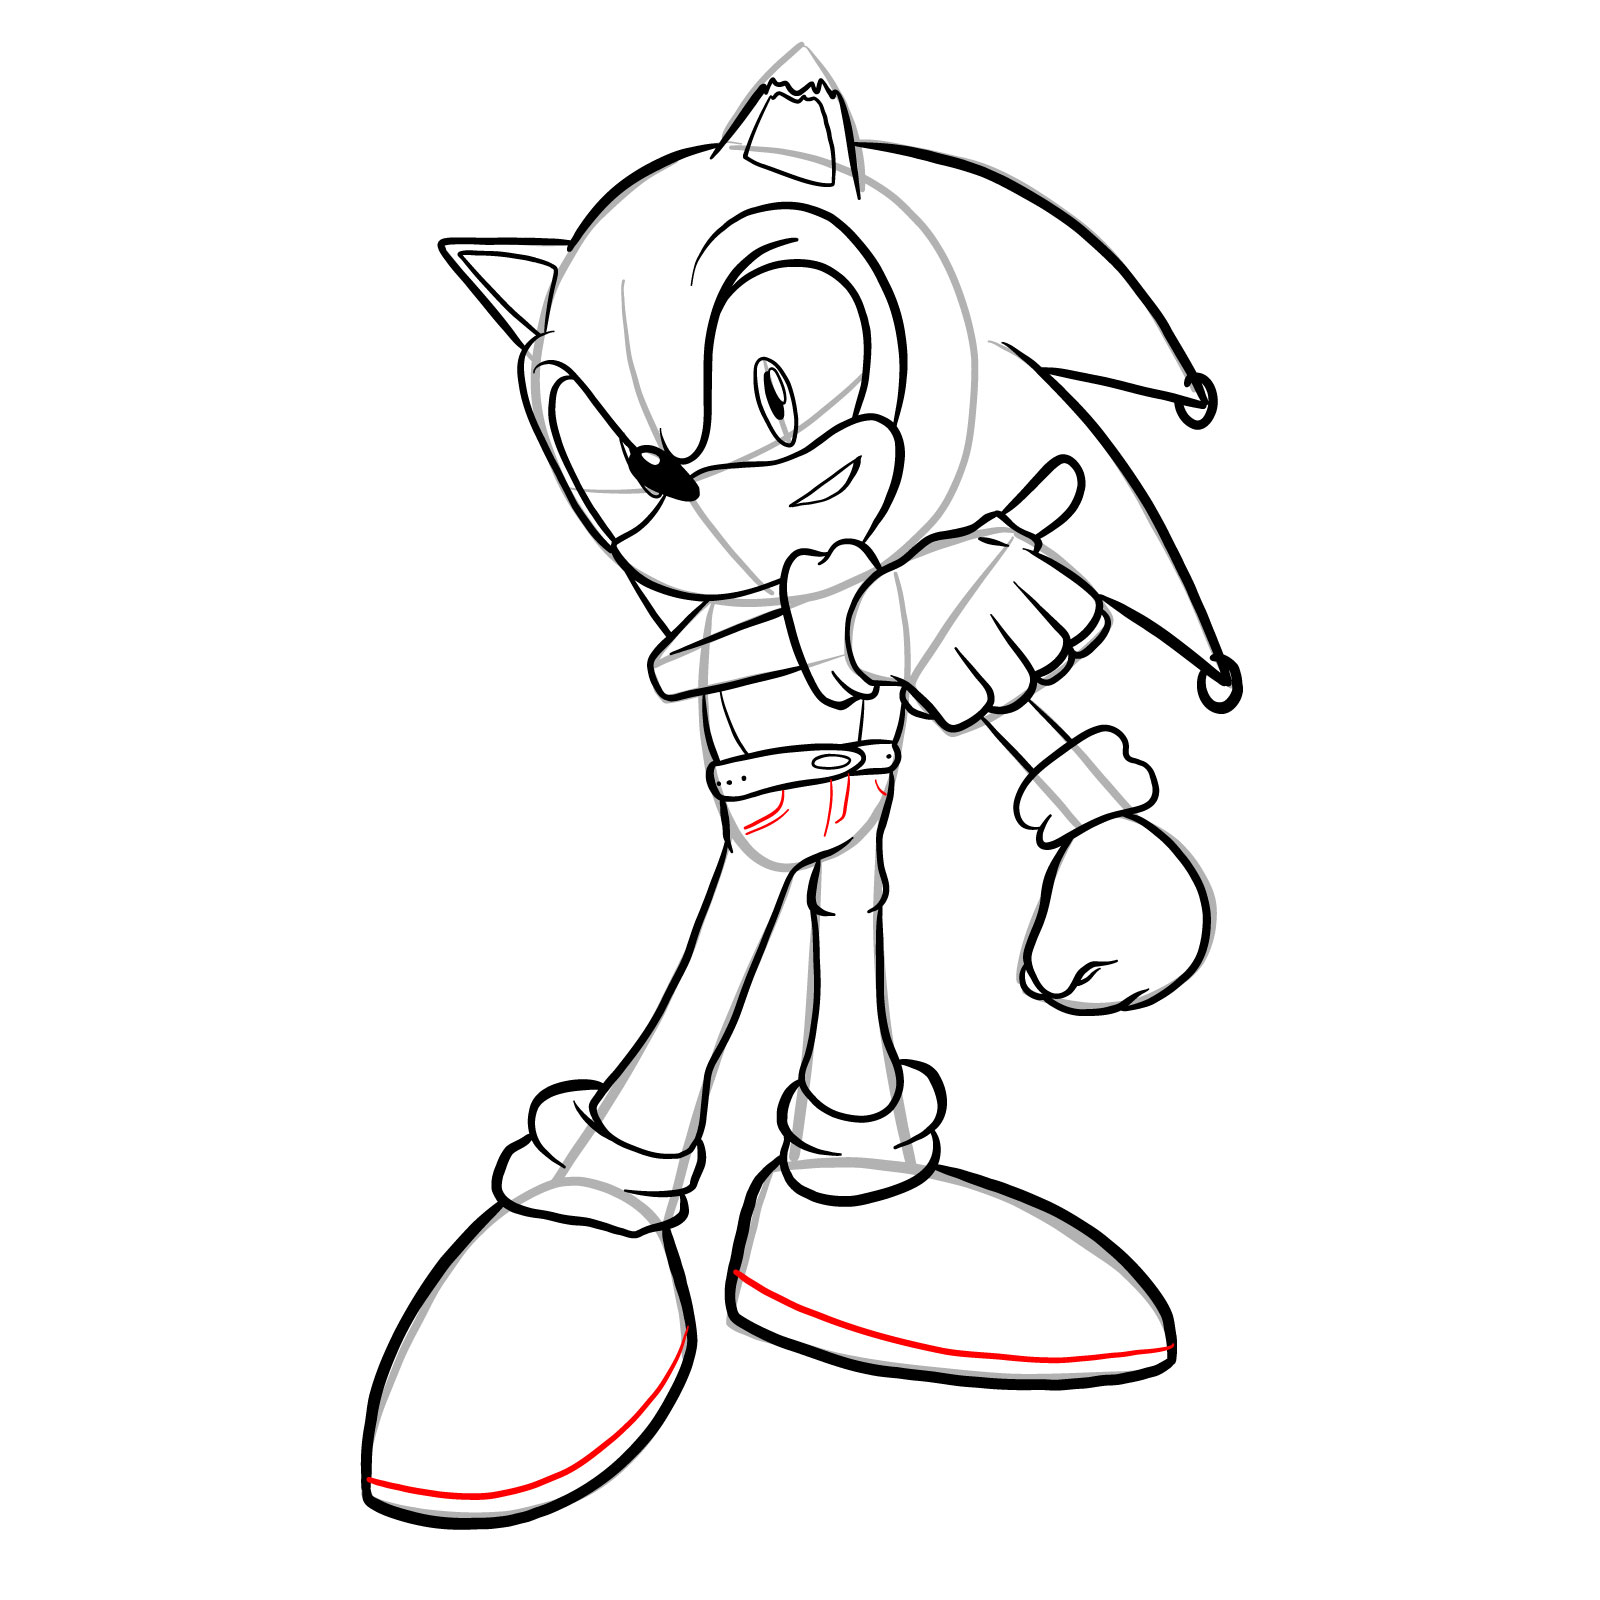 How to draw Coldsteel the Hedgehog - step 28